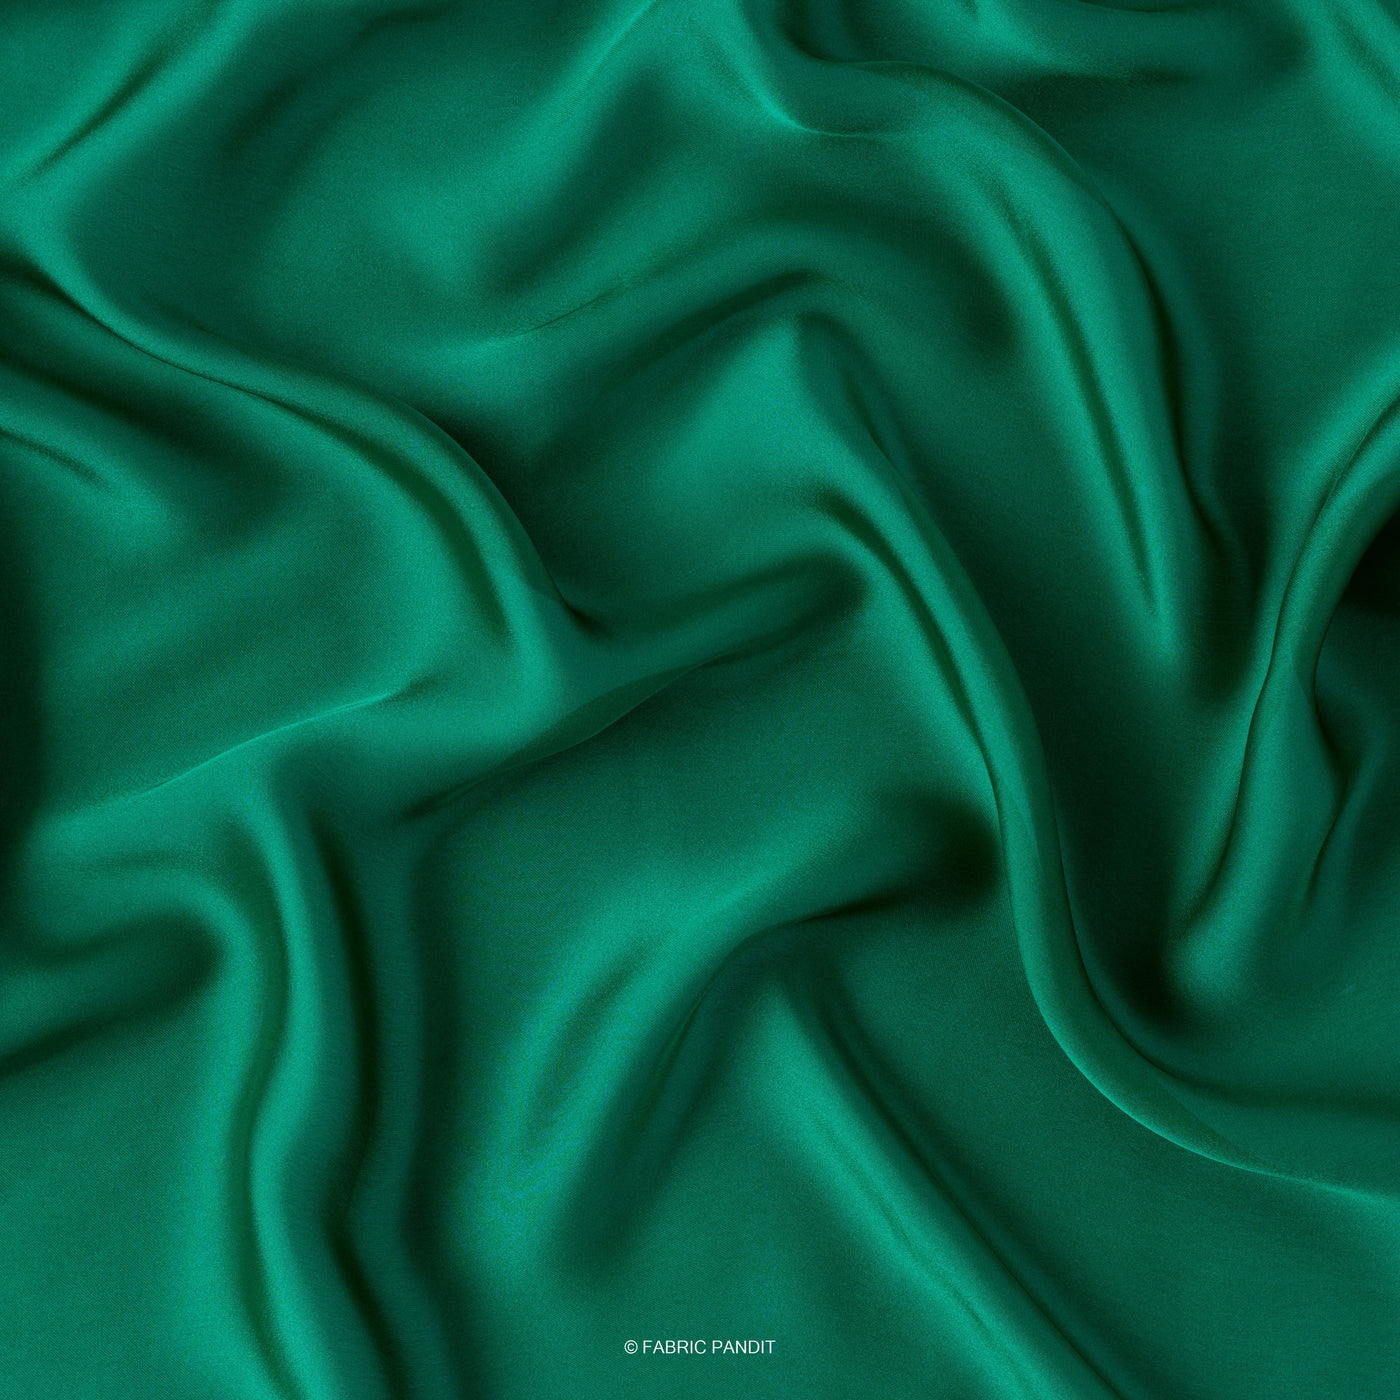 Fabric Pandit Fabric Pine Green Color Plain Satin Georgette Fabric (Width 44 Inches)